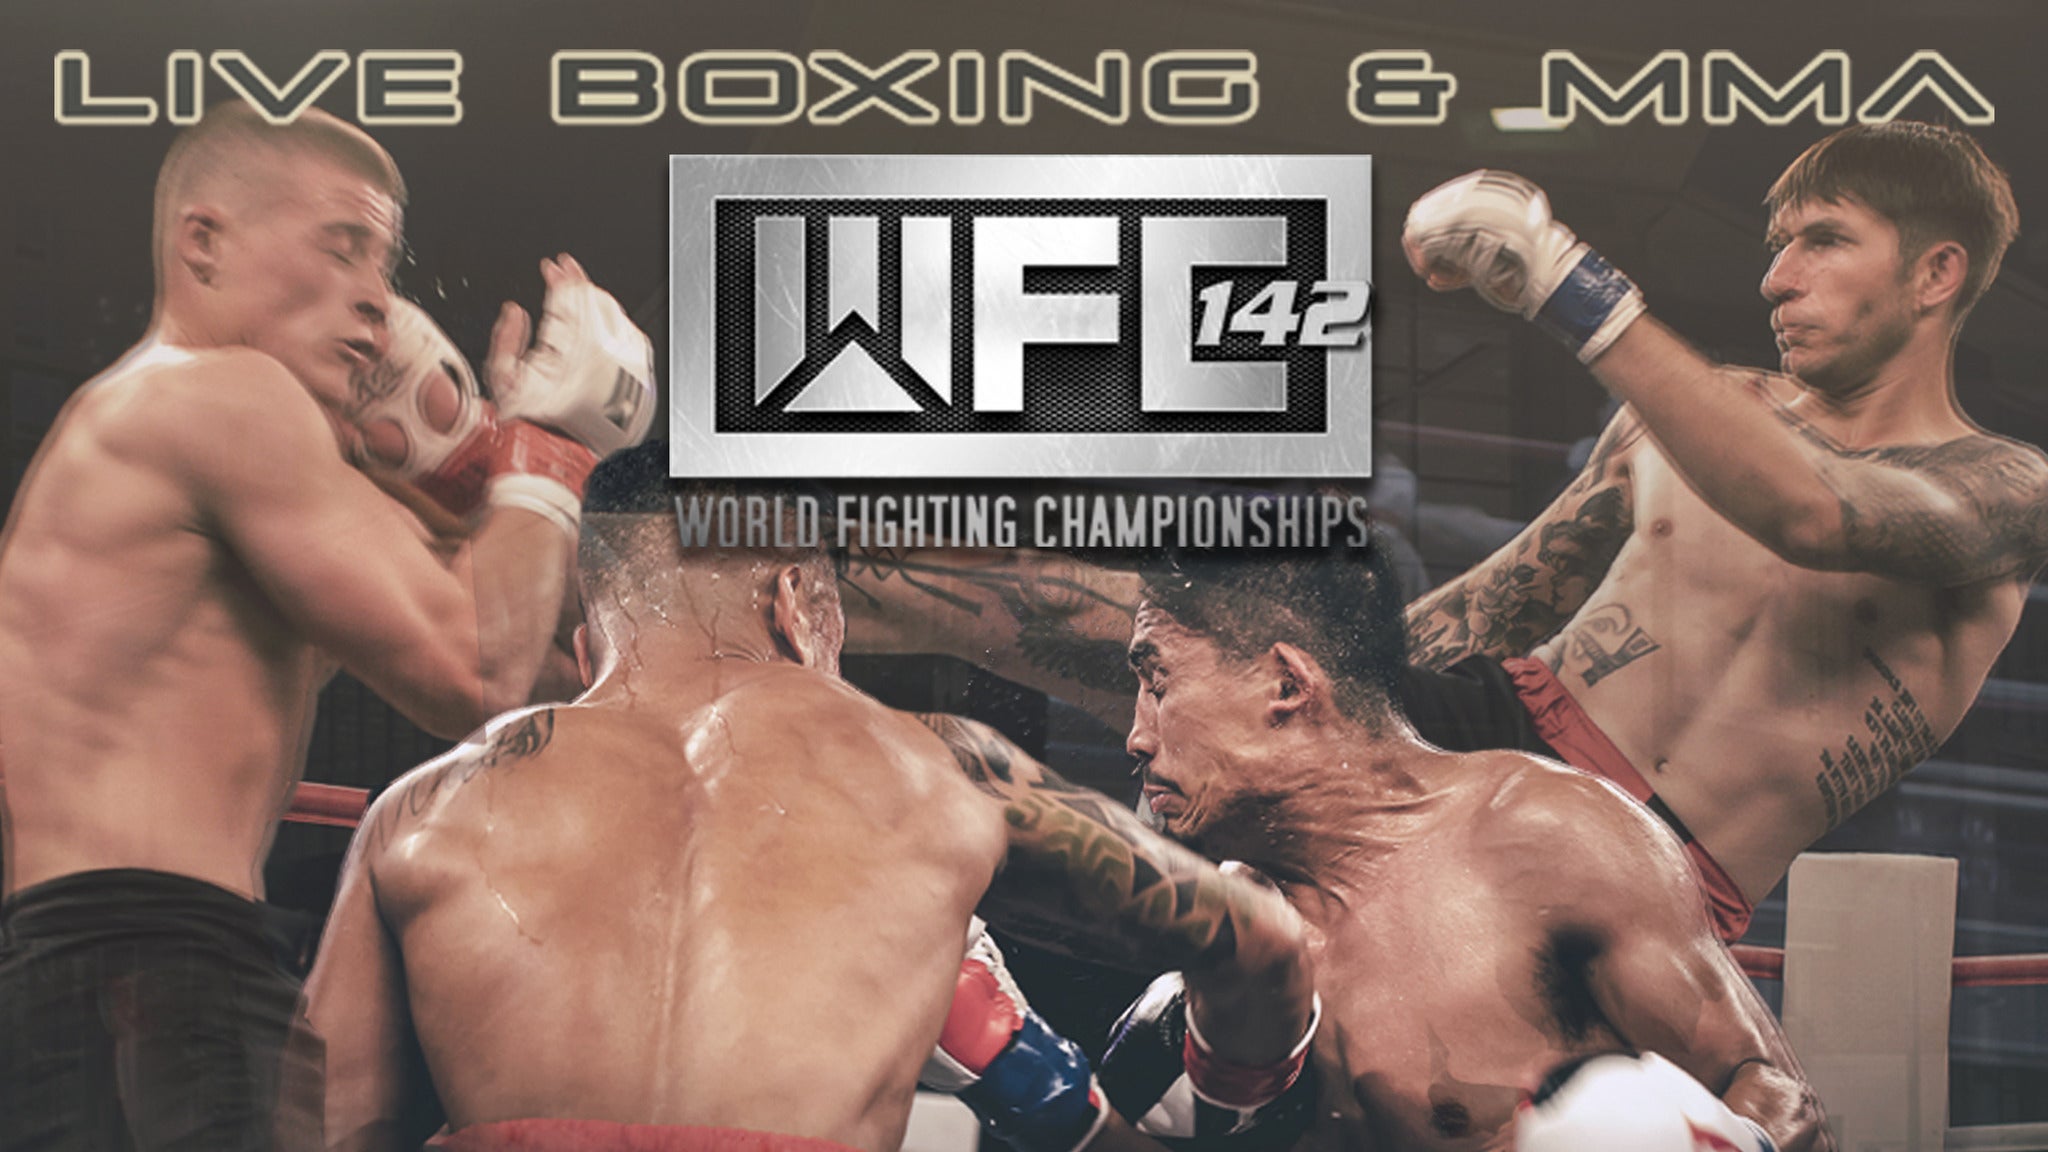 presale code for WFC 140 - Boxing tickets in Lawrenceburg - IN (Lawrenceburg Event Center)